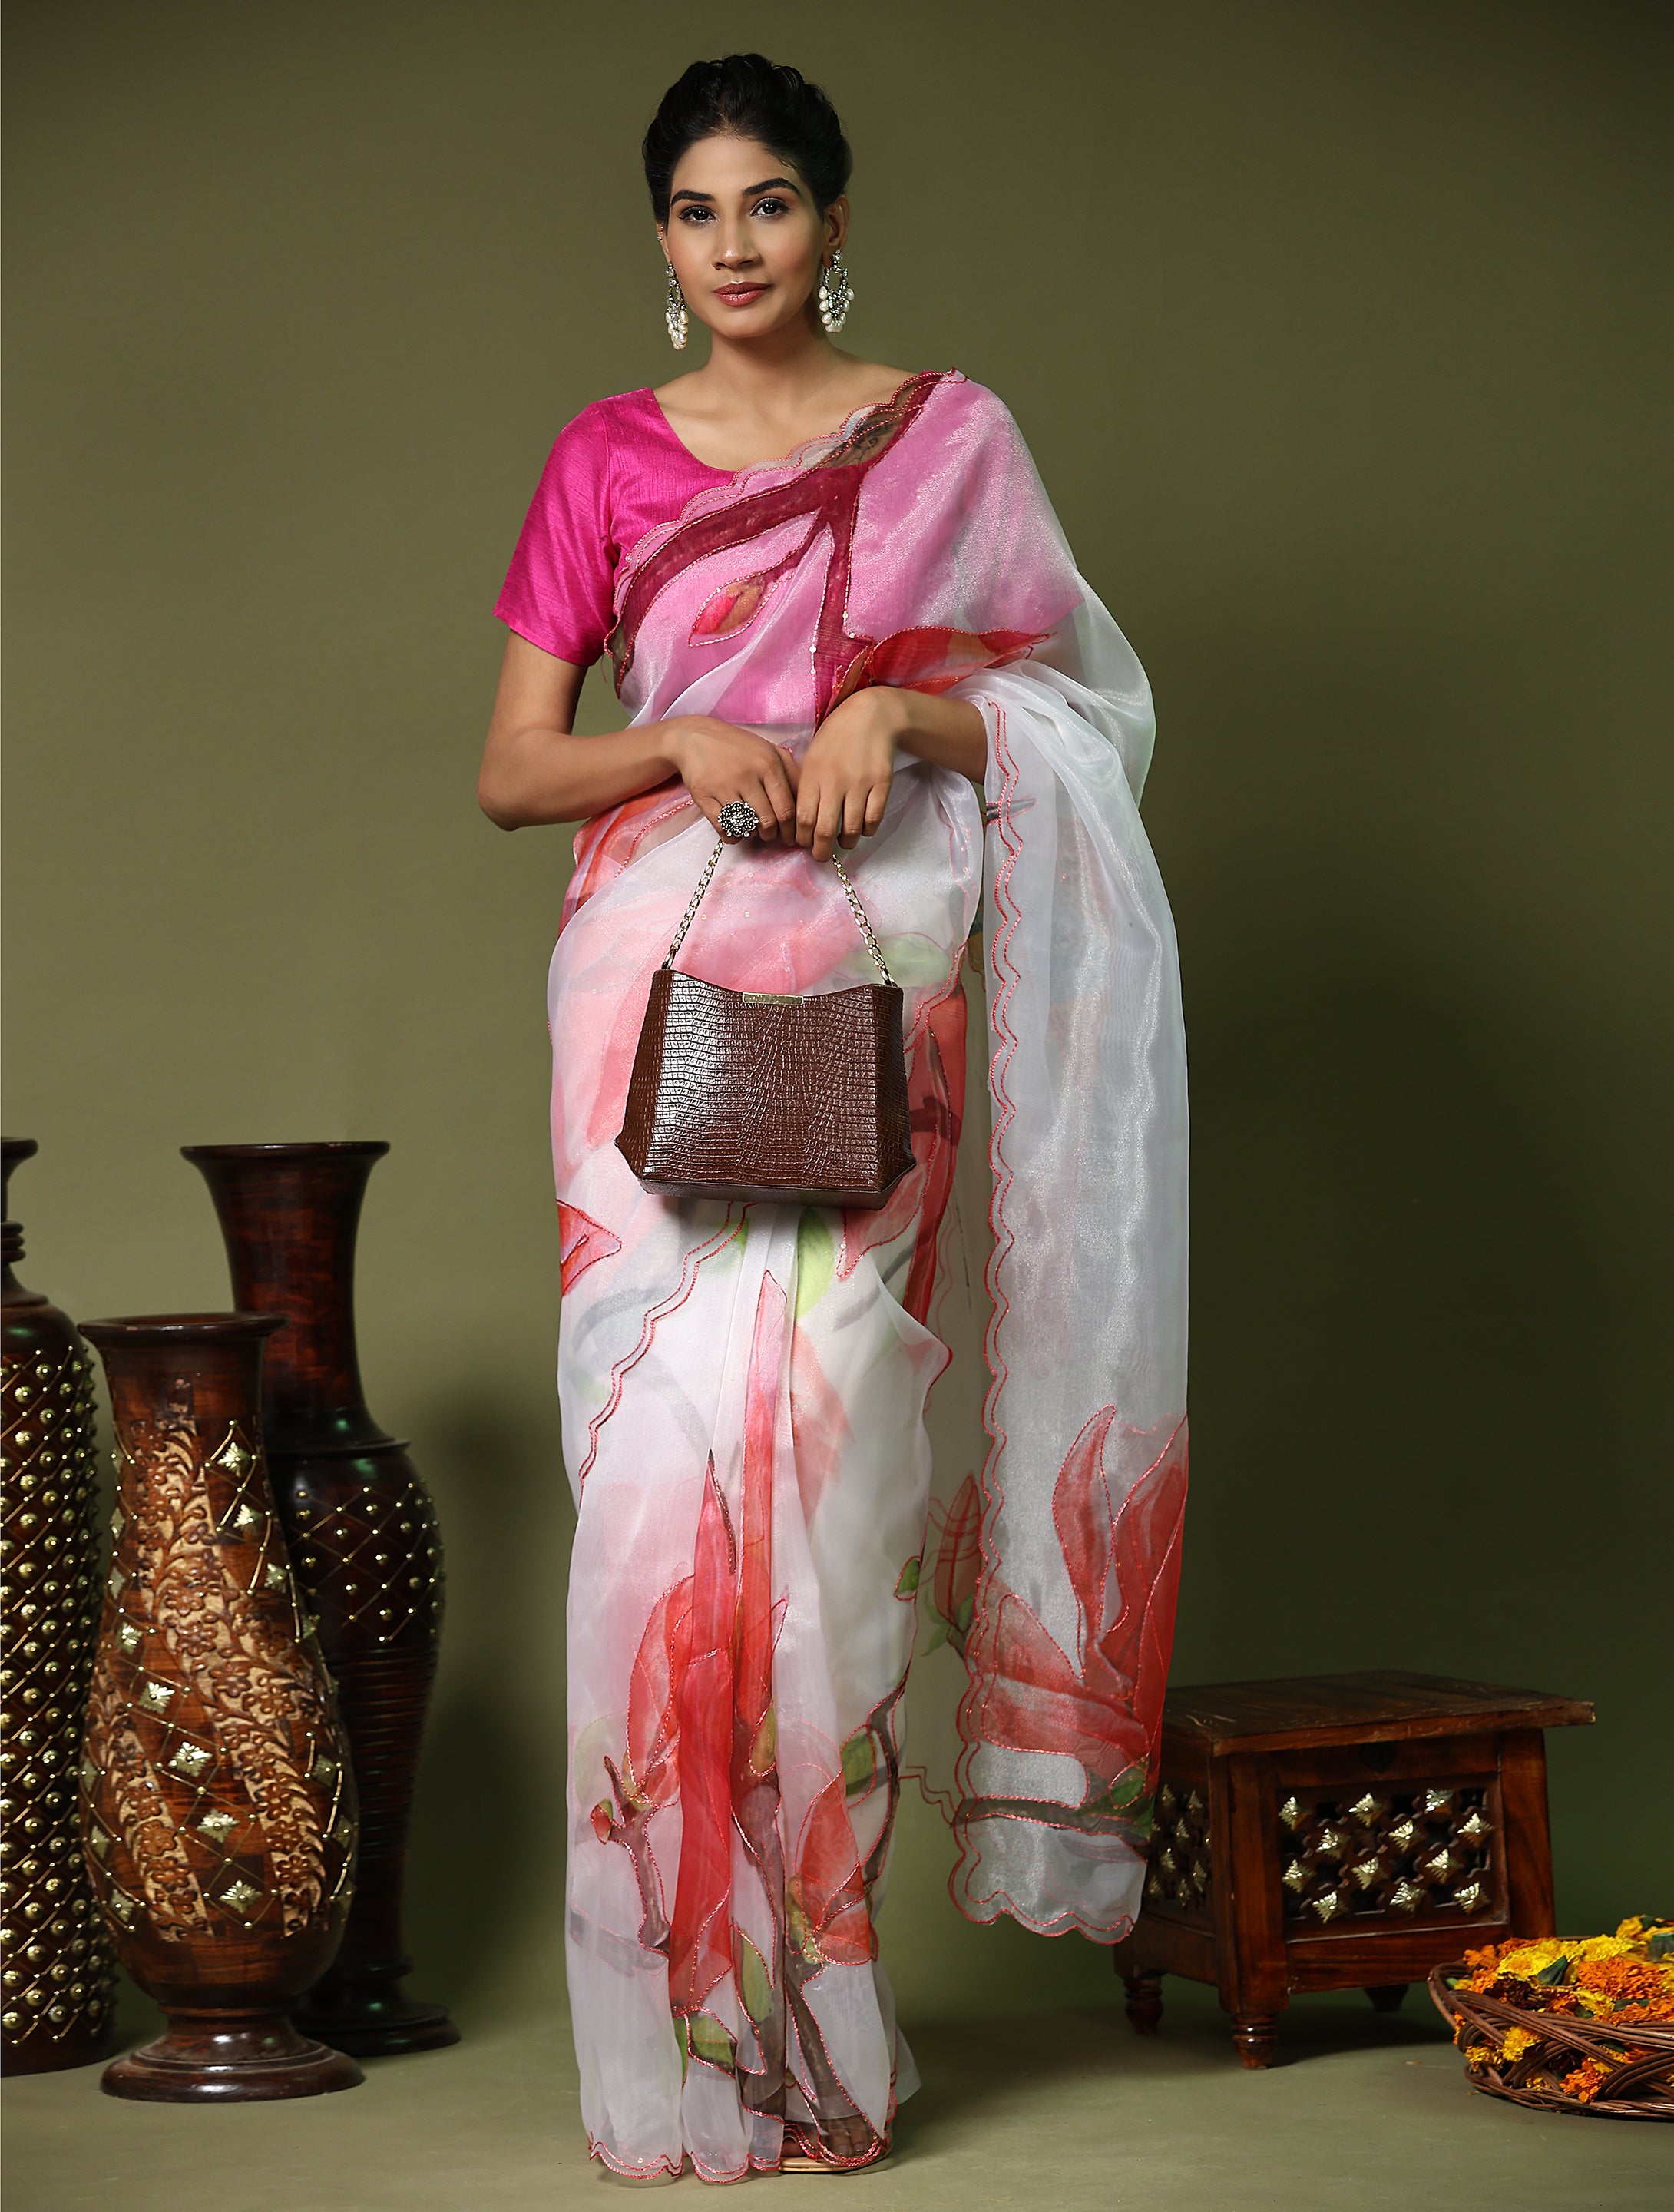 Beautiful White Organza Floral Printed Saree With Pink Blouse